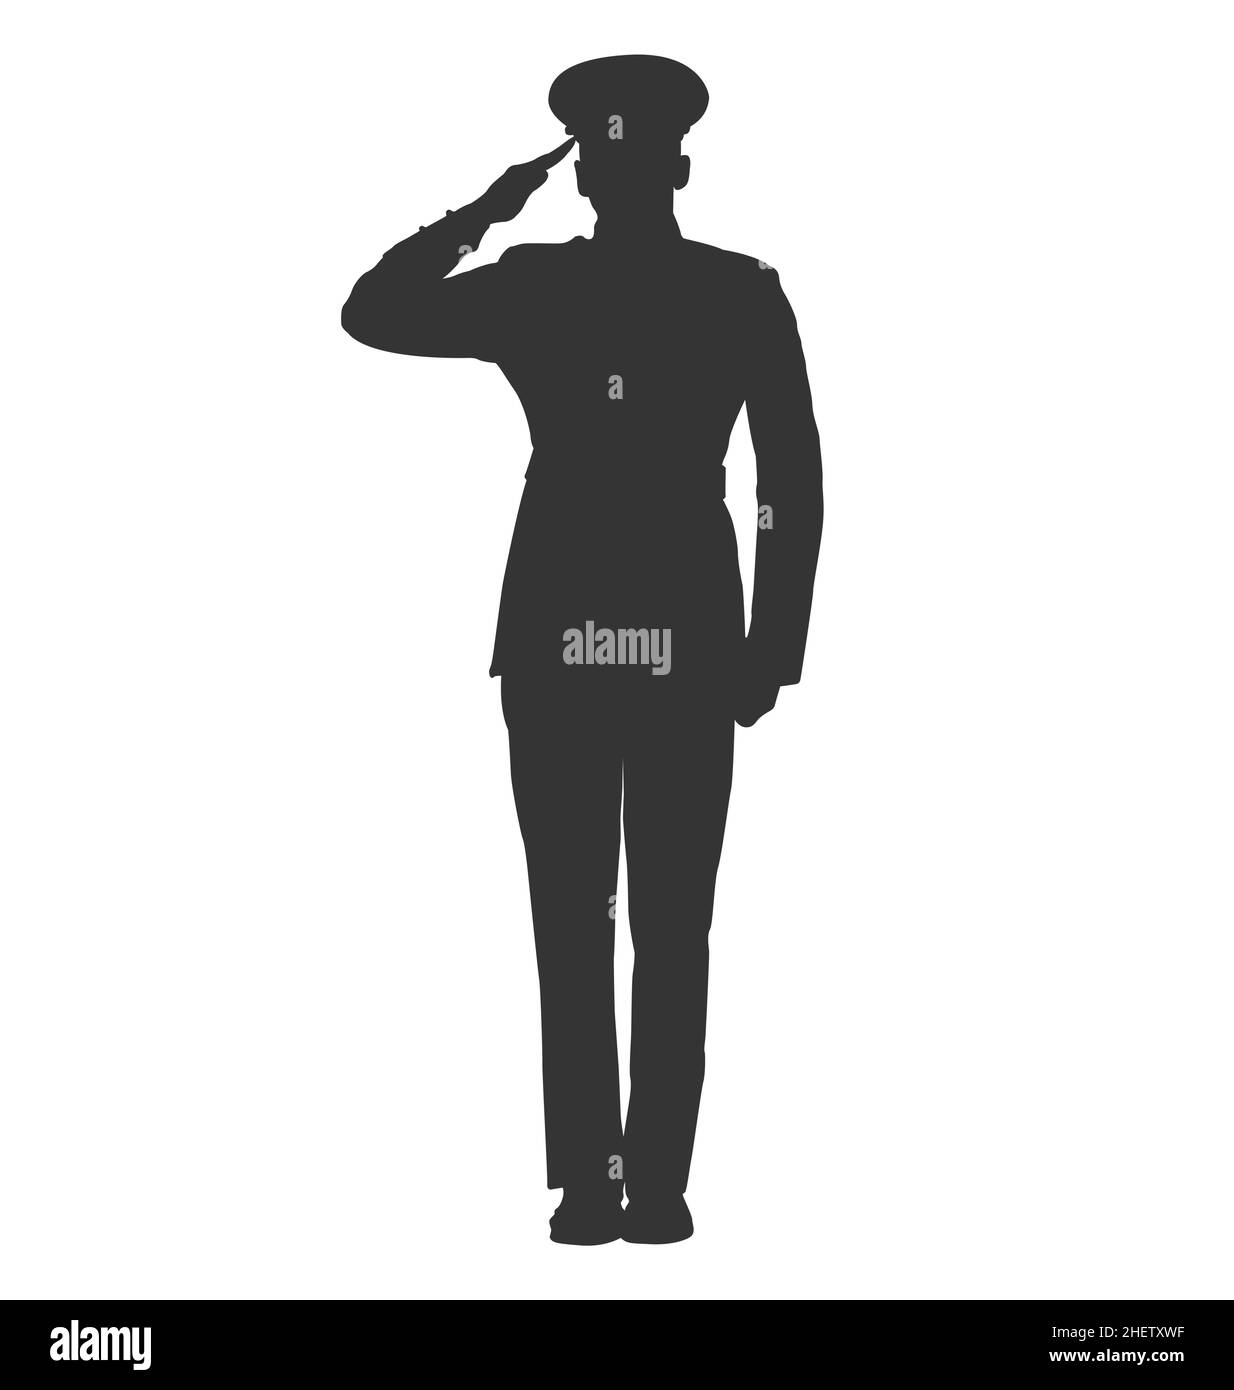 military police army marine navy air force soldier salute silhouette vector on white background Stock Vector